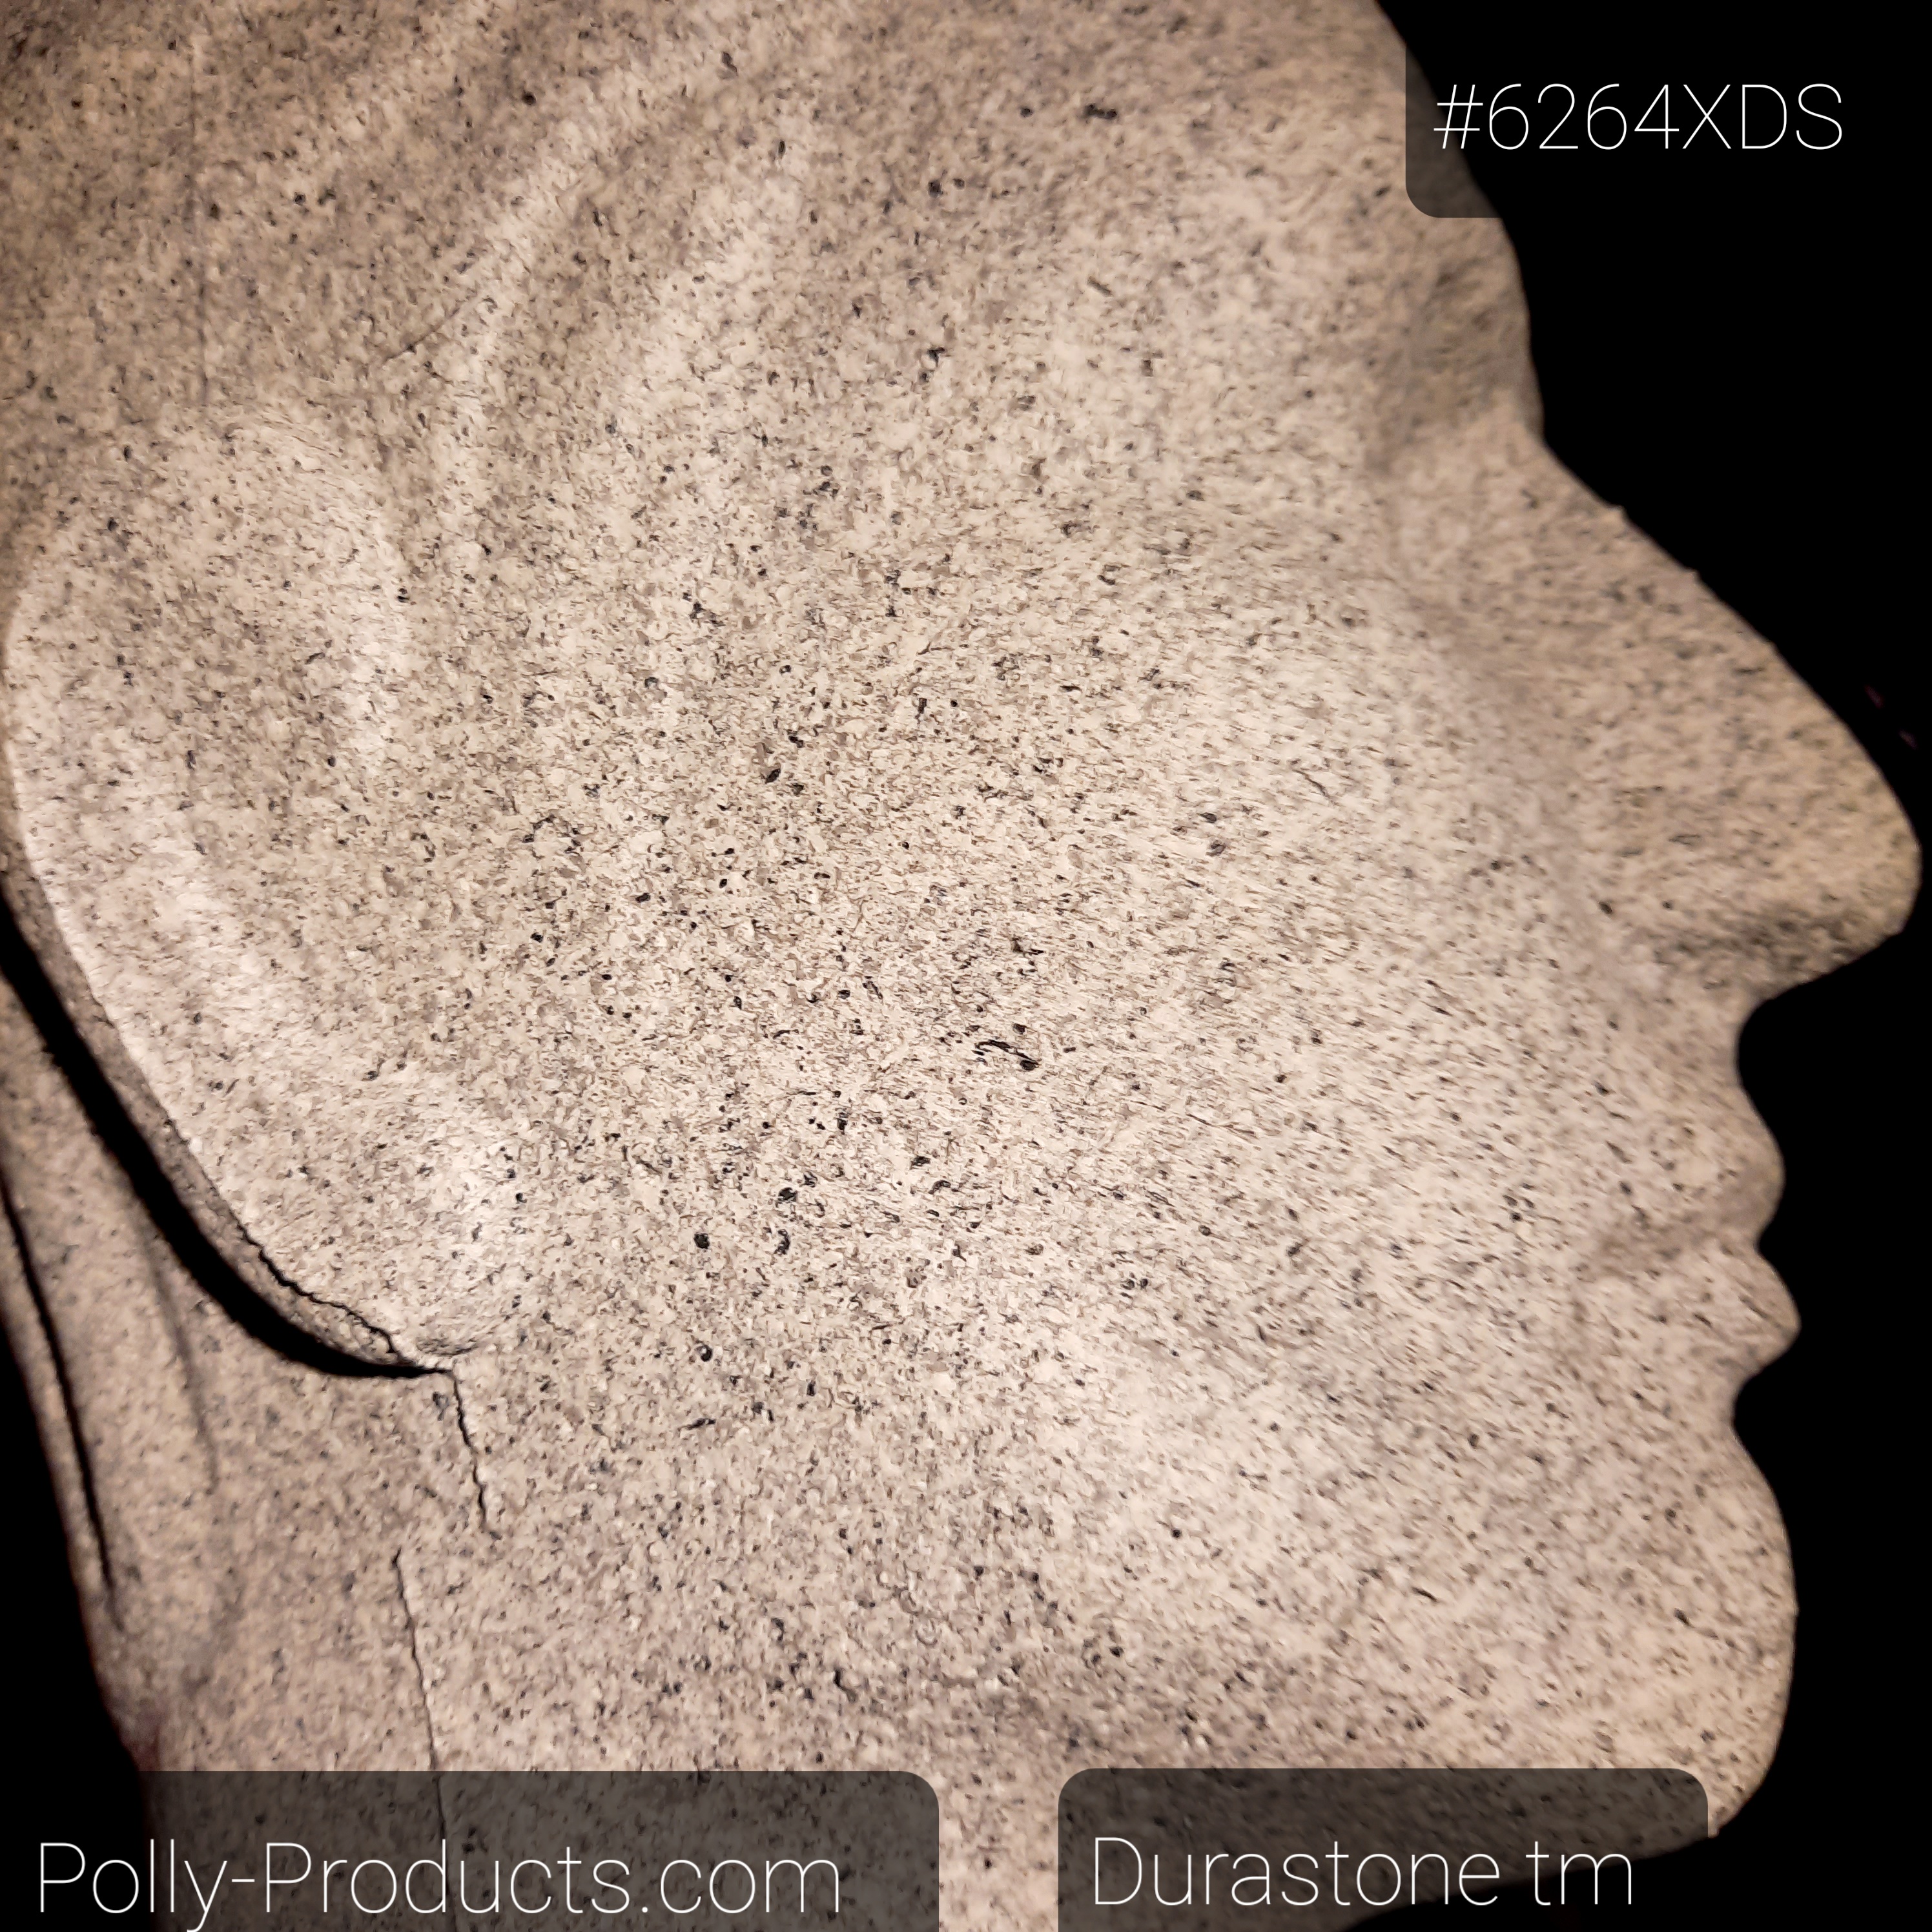 #6264XDS 16"H STYLIZED MALE DURASTONE tm HEAD FORMS. MADE IN THE USA BY POLLY PRODUCTS COMPANY 